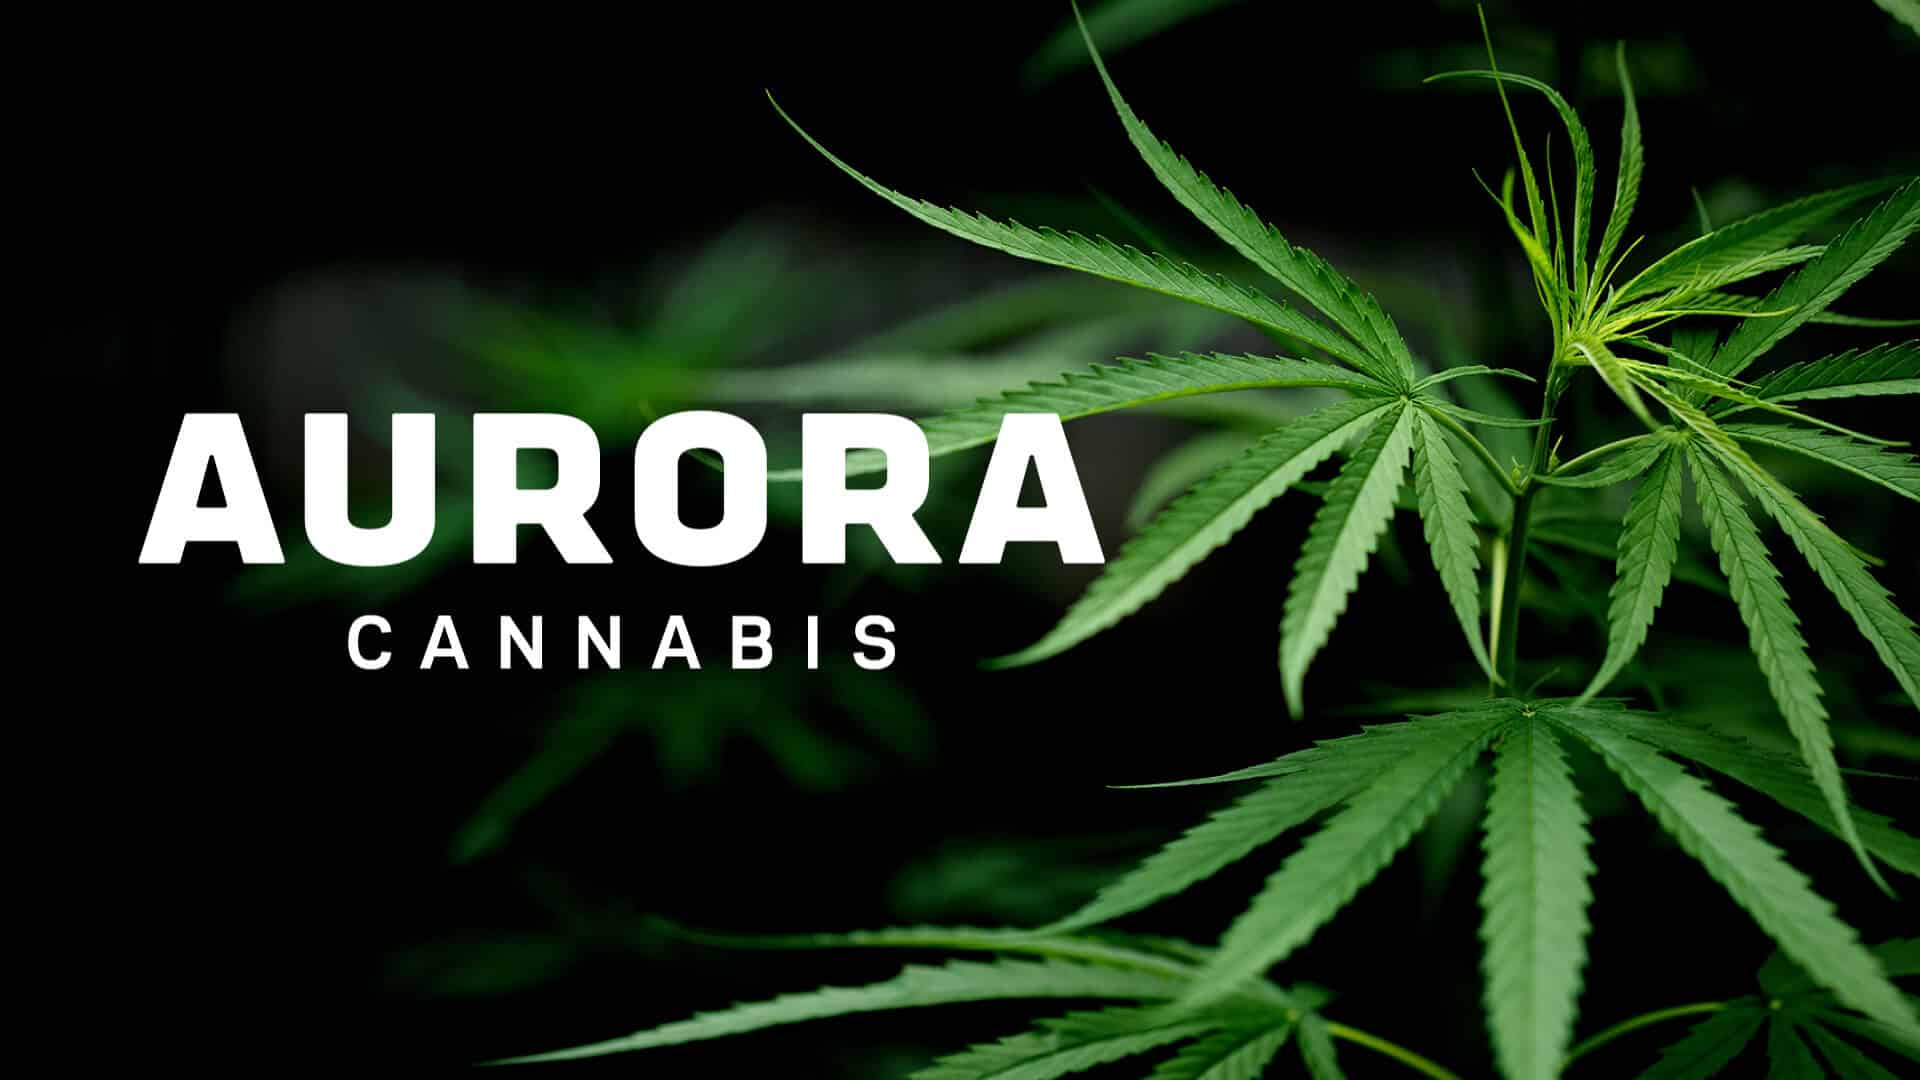 Aurora Cannabis Has Opened a Flagship Store in West Edmonton Mall